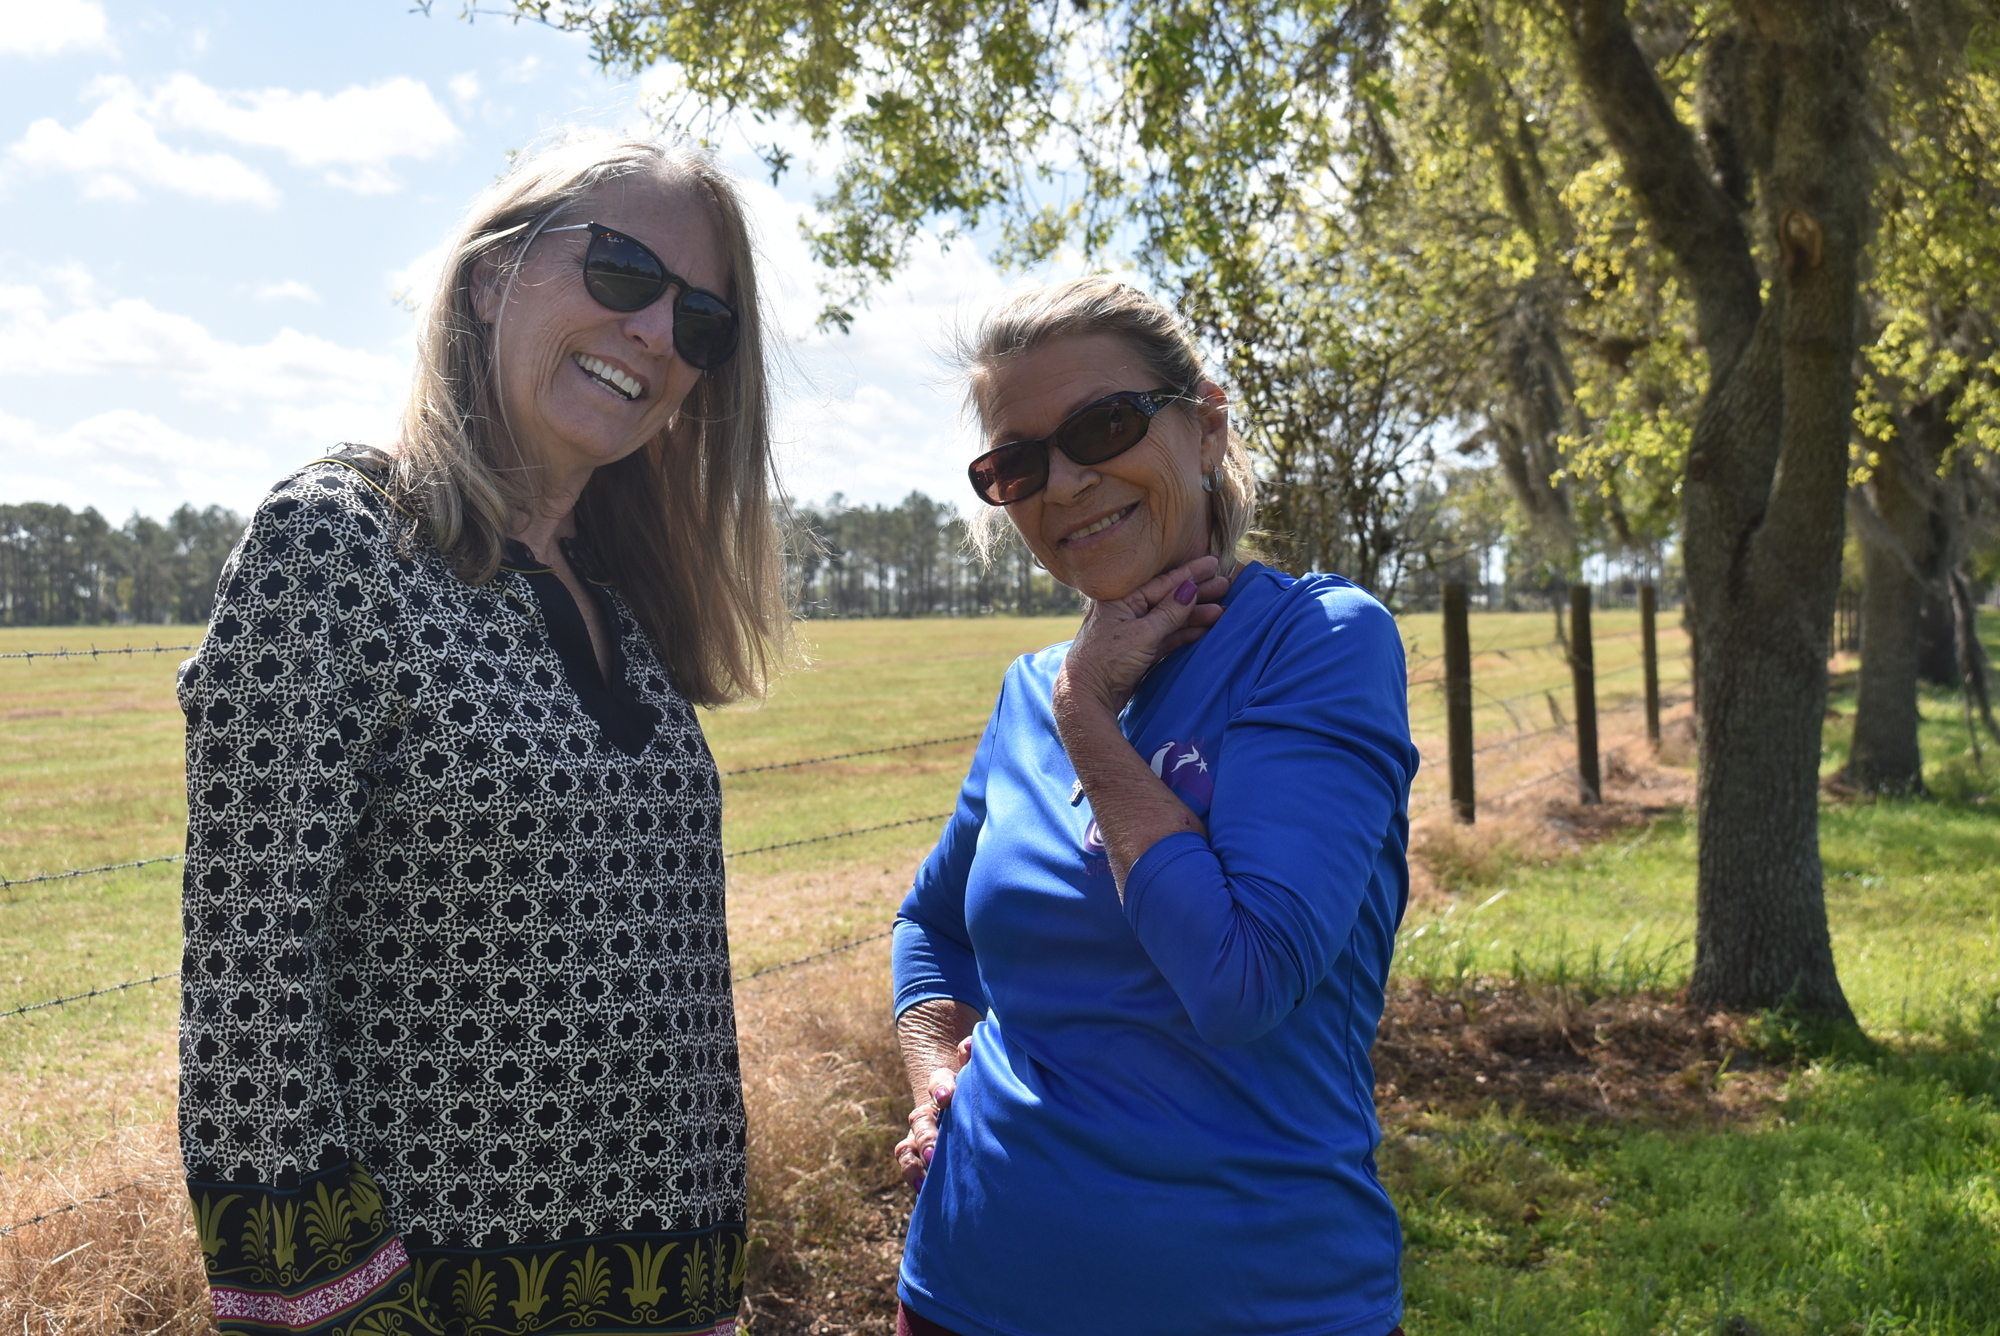 Myakka residents Elizabeth Arnold and Carol Felts are concerned about development encroaching on the area surrounding their homes.